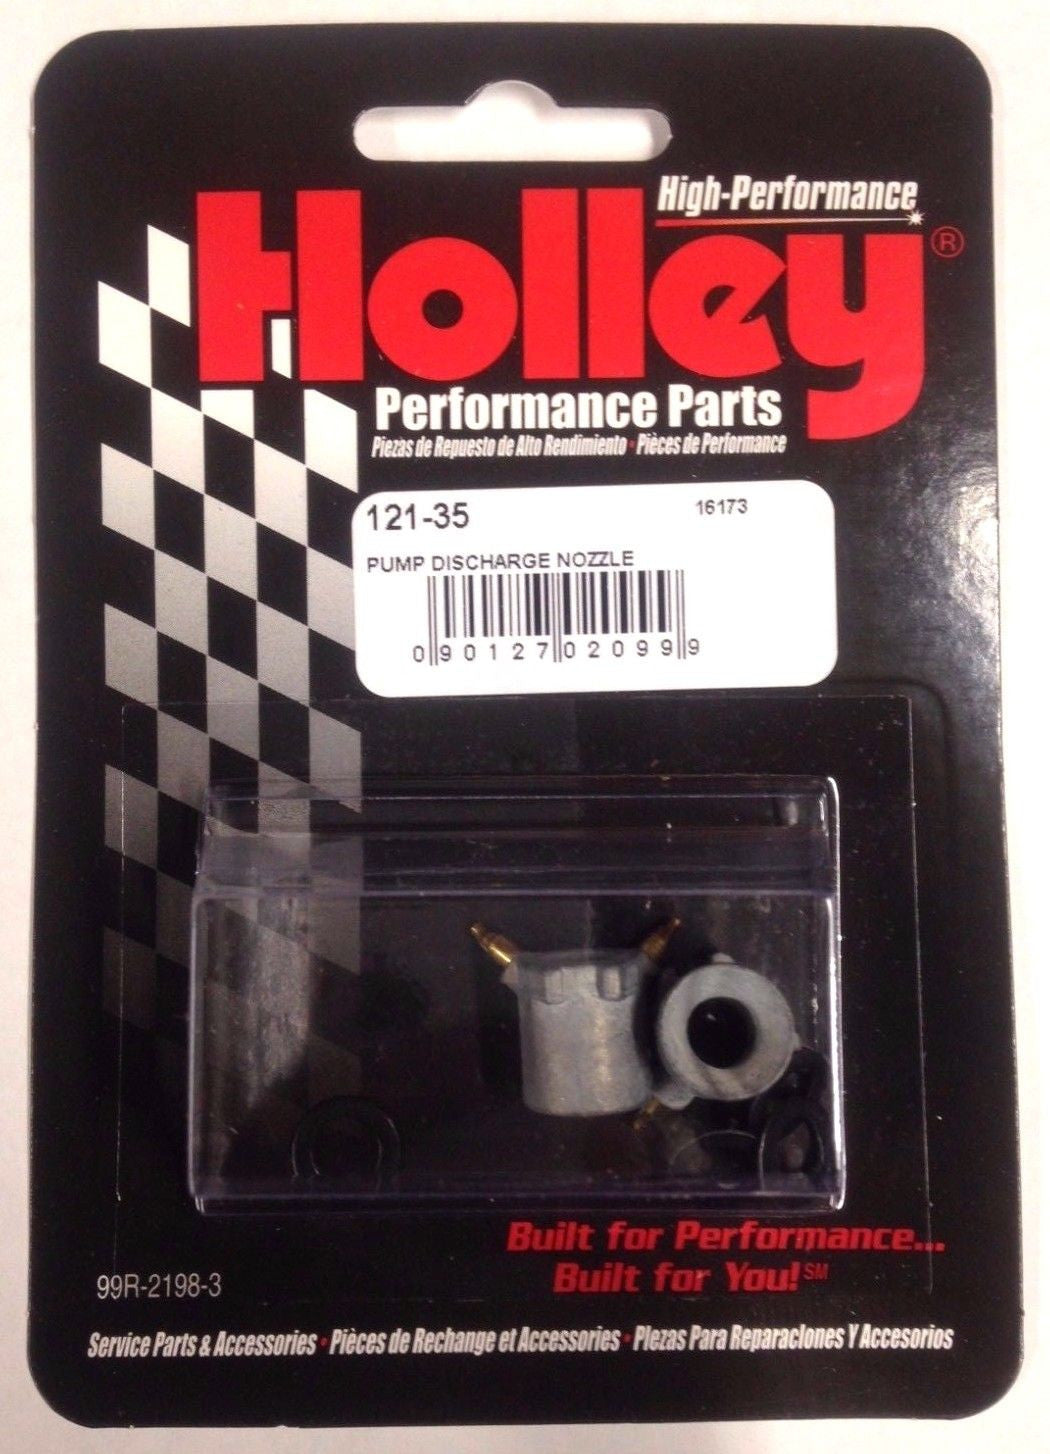 Holley 121-35 Accelerator Pump Discharge Nozzle 0.035 in. Hole Size Tube Style